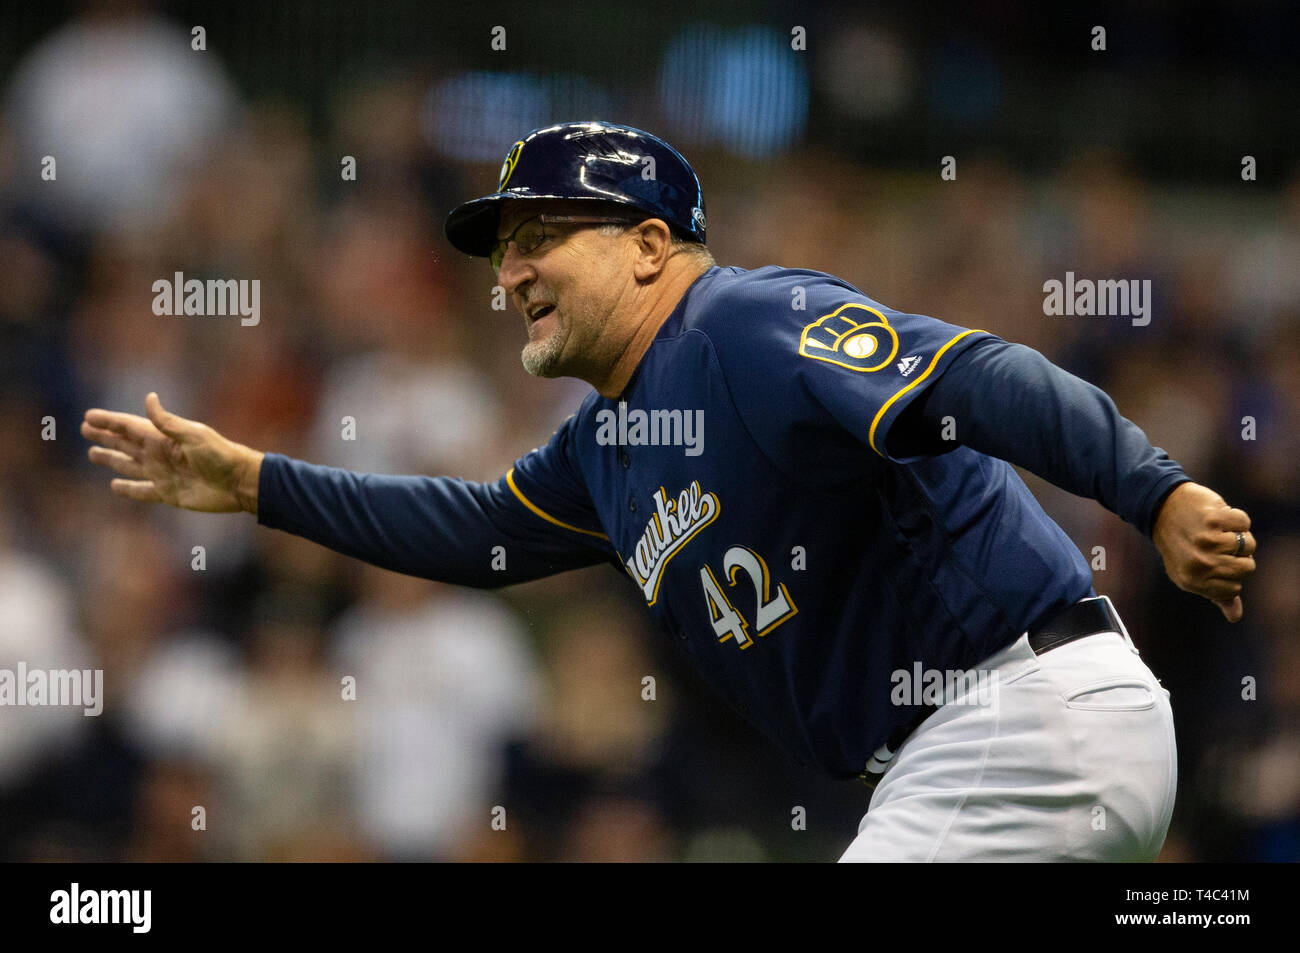 Milwaukee, WI, USA. 15th Apr, 2019. Milwaukee Brewers third base coach Ed Sedar #42 congratulates Milwaukee Brewers Mike Moustakas after hitting a solo home run in the first inning of the Major League Baseball game between the Milwaukee Brewers and the St. Louis Cardinals at Miller Park in Milwaukee, WI. John Fisher/CSM/Alamy Live News Stock Photo